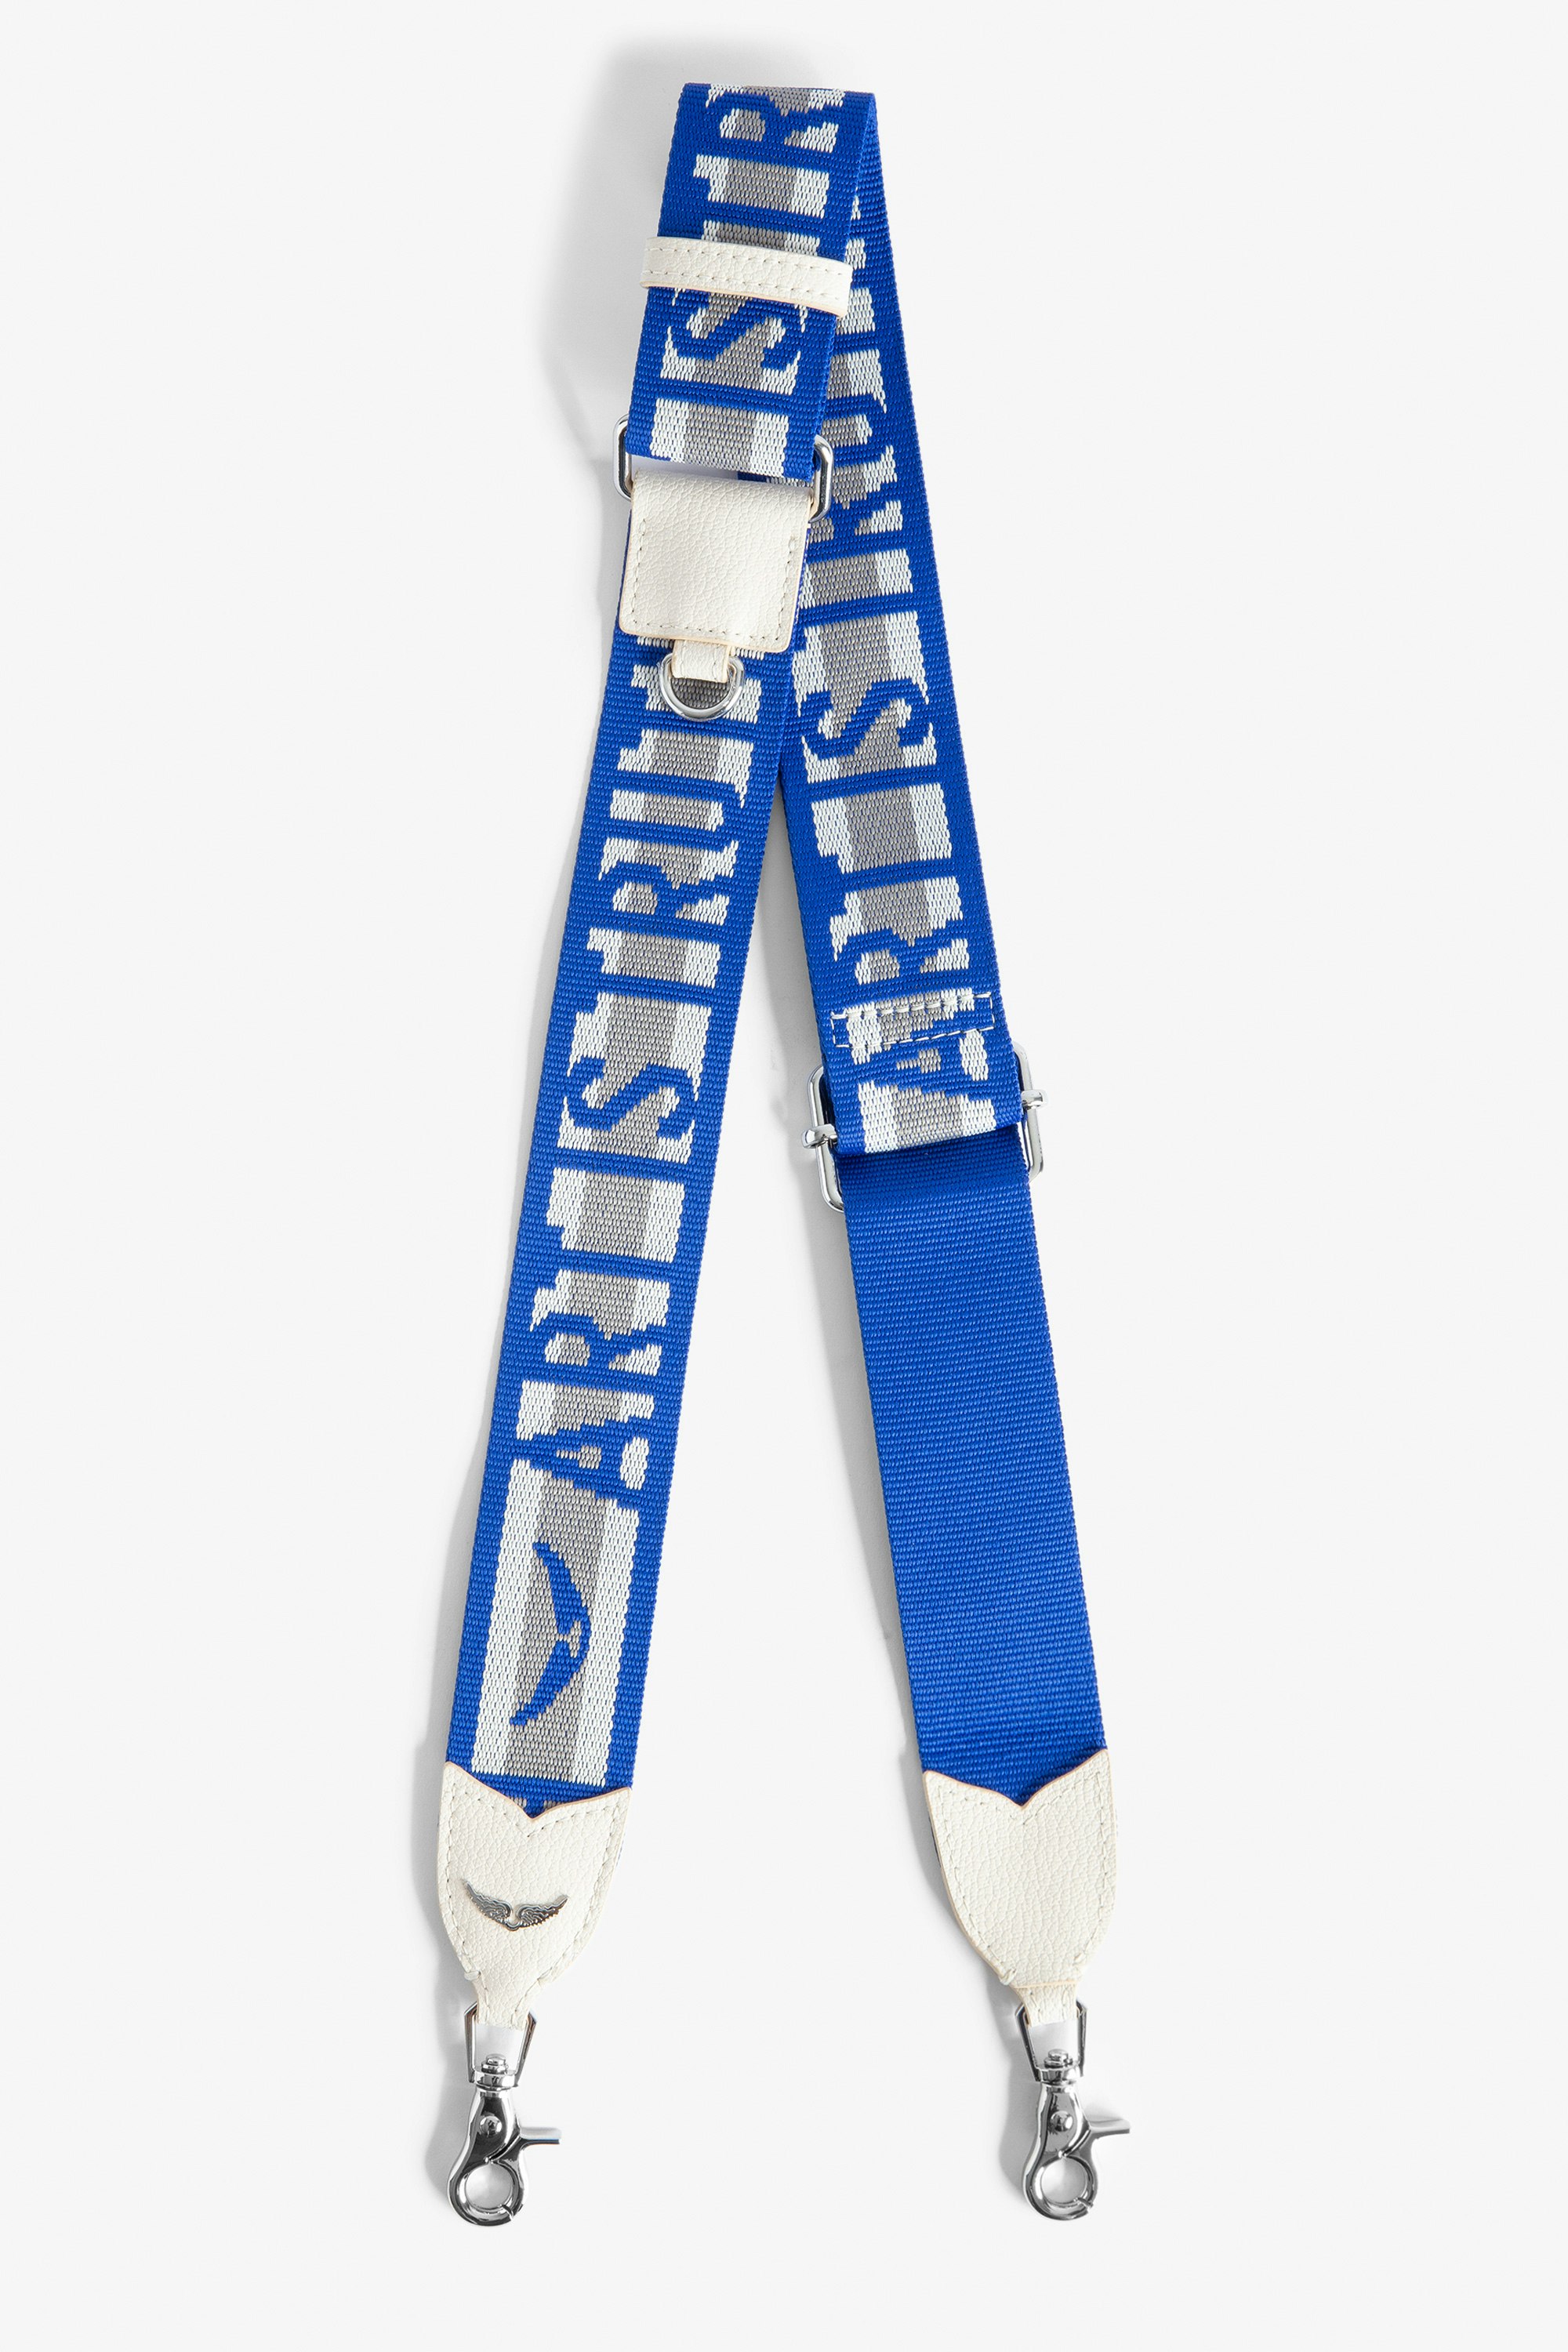 Zadig Shoulder Strap Women’s blue leather and nylon shoulder strap with “Art is Truth” slogan and wings motif.